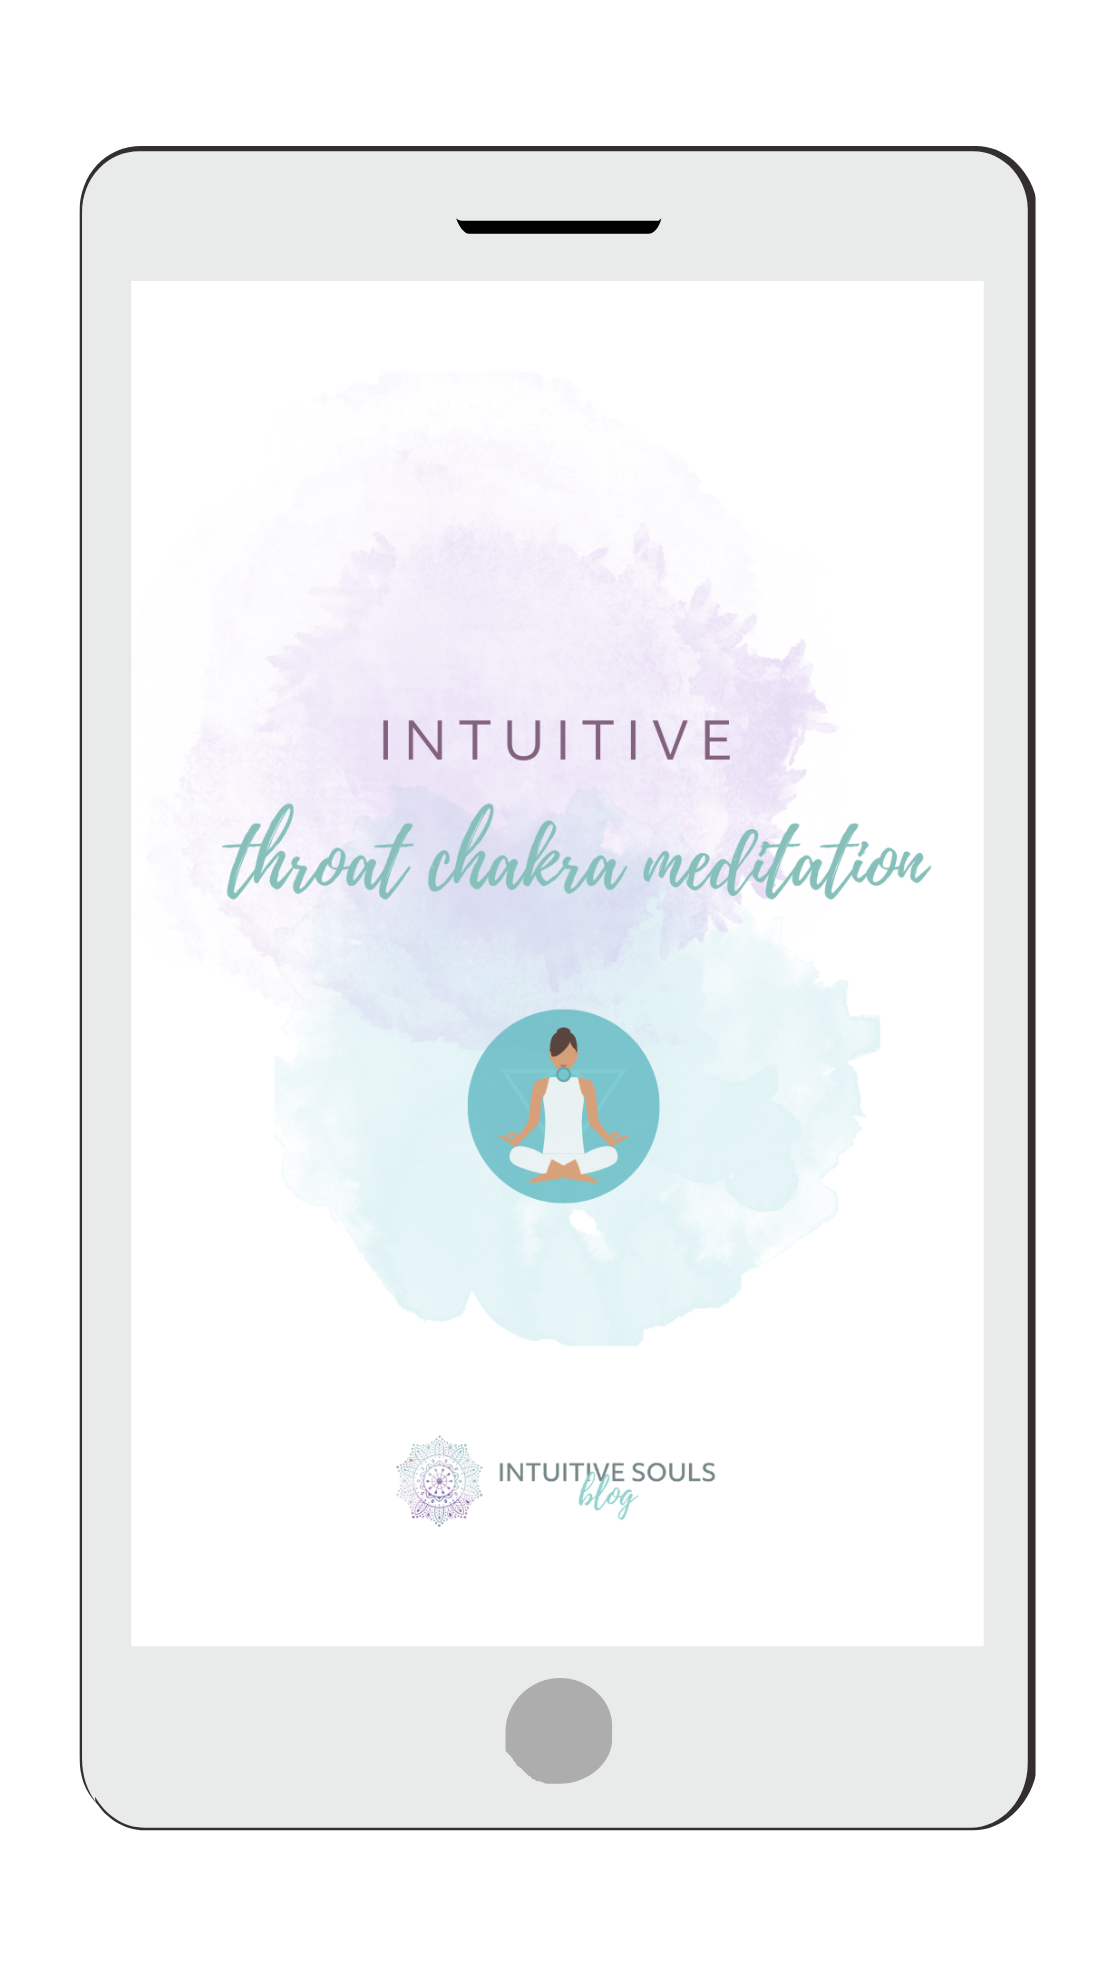 Intuitive Throat Chakra Meditation - open and balance your energy center